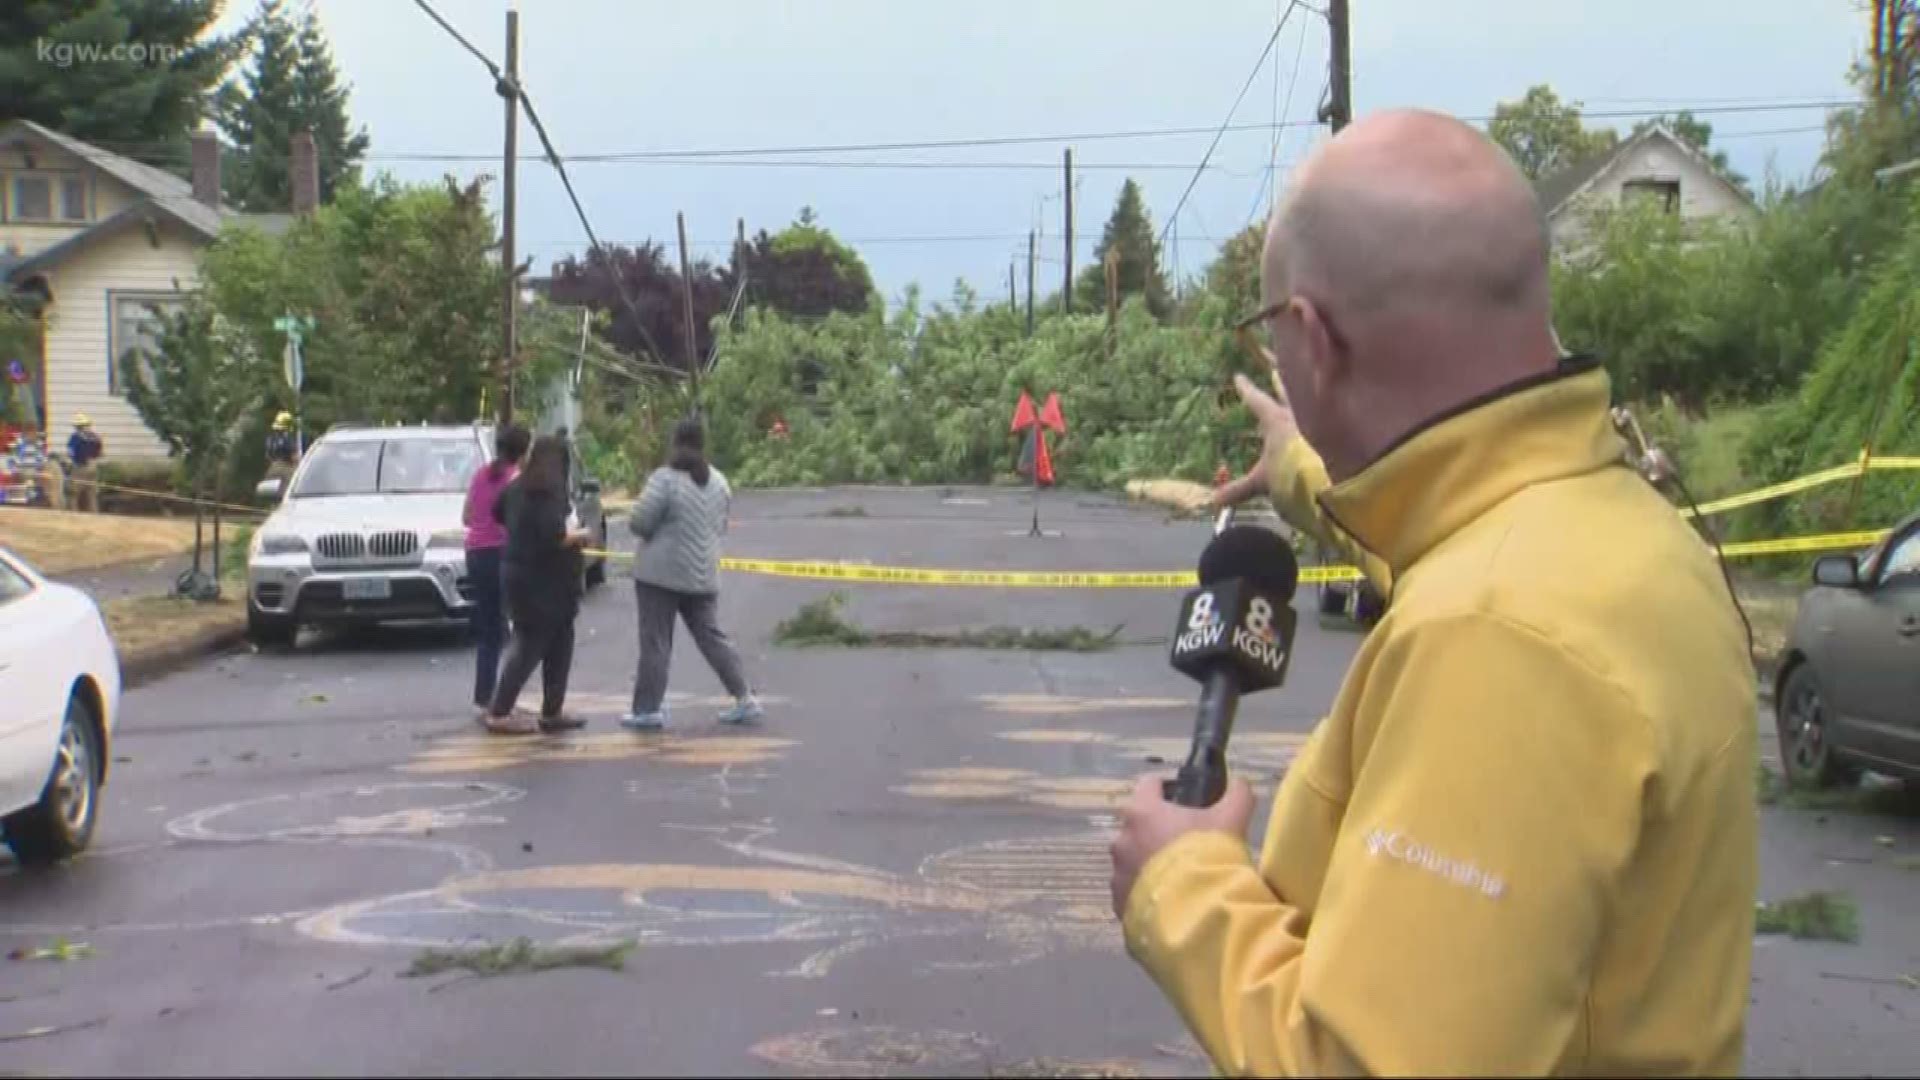 Storms blew through NE Portland and Vancouver knocking over trees, raining down hail and causing what possible funnel clouds.